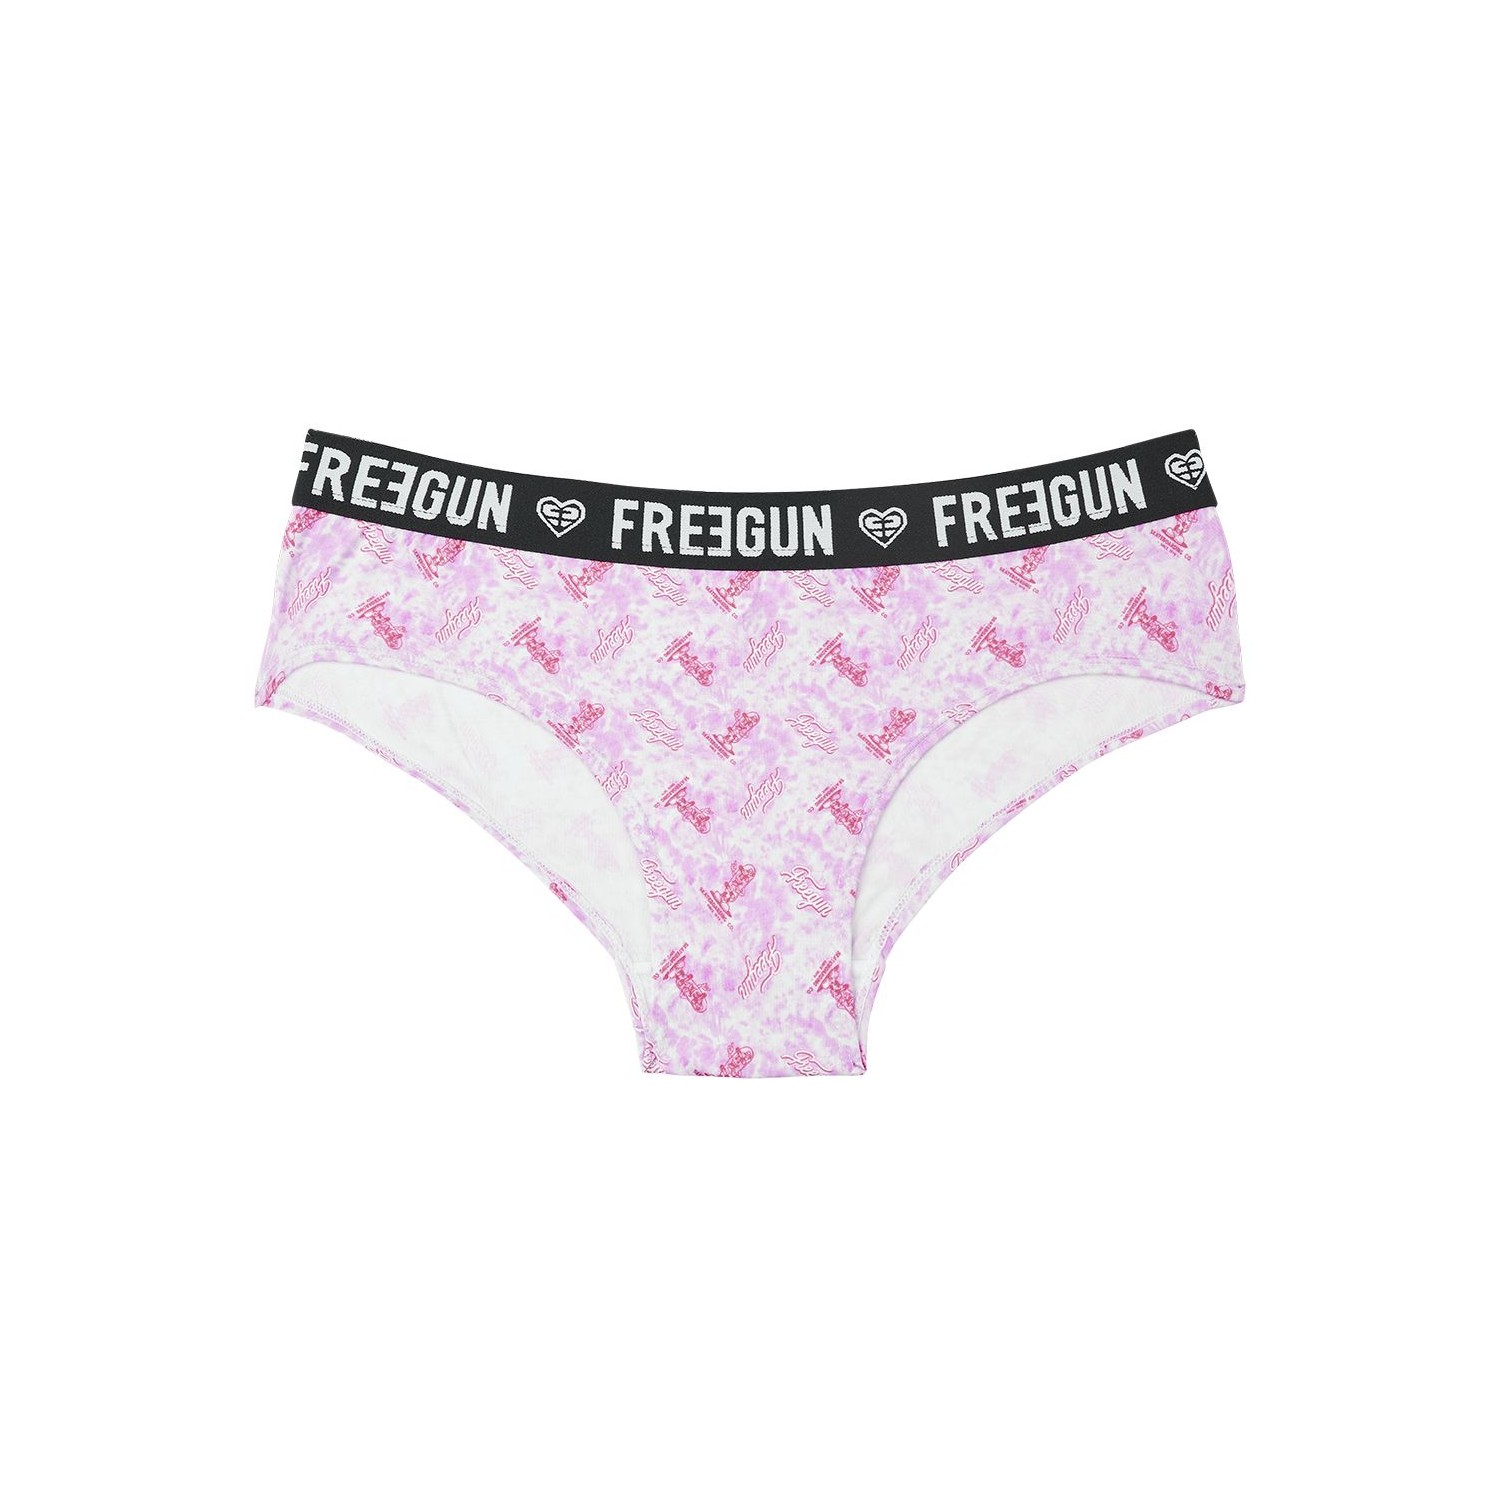 Boxer femme Tie and Dye